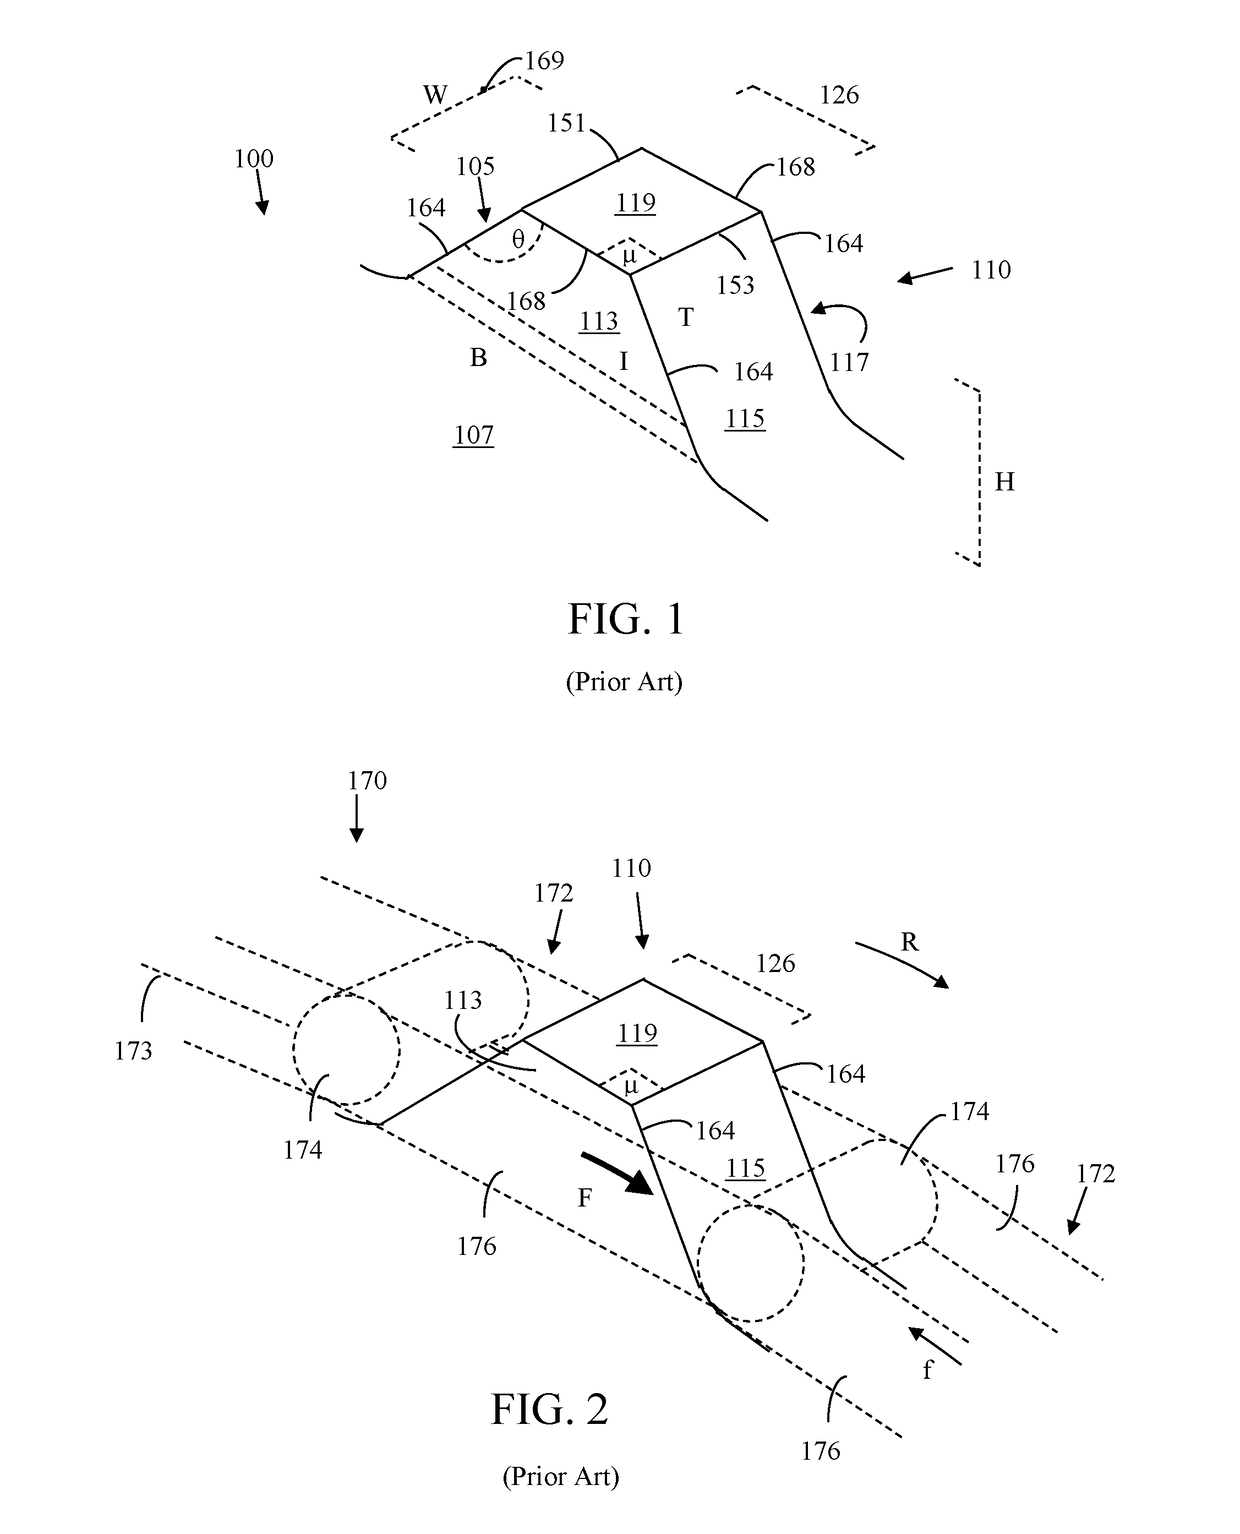 Method and system for evaluating and predicting sprocket tooth wear